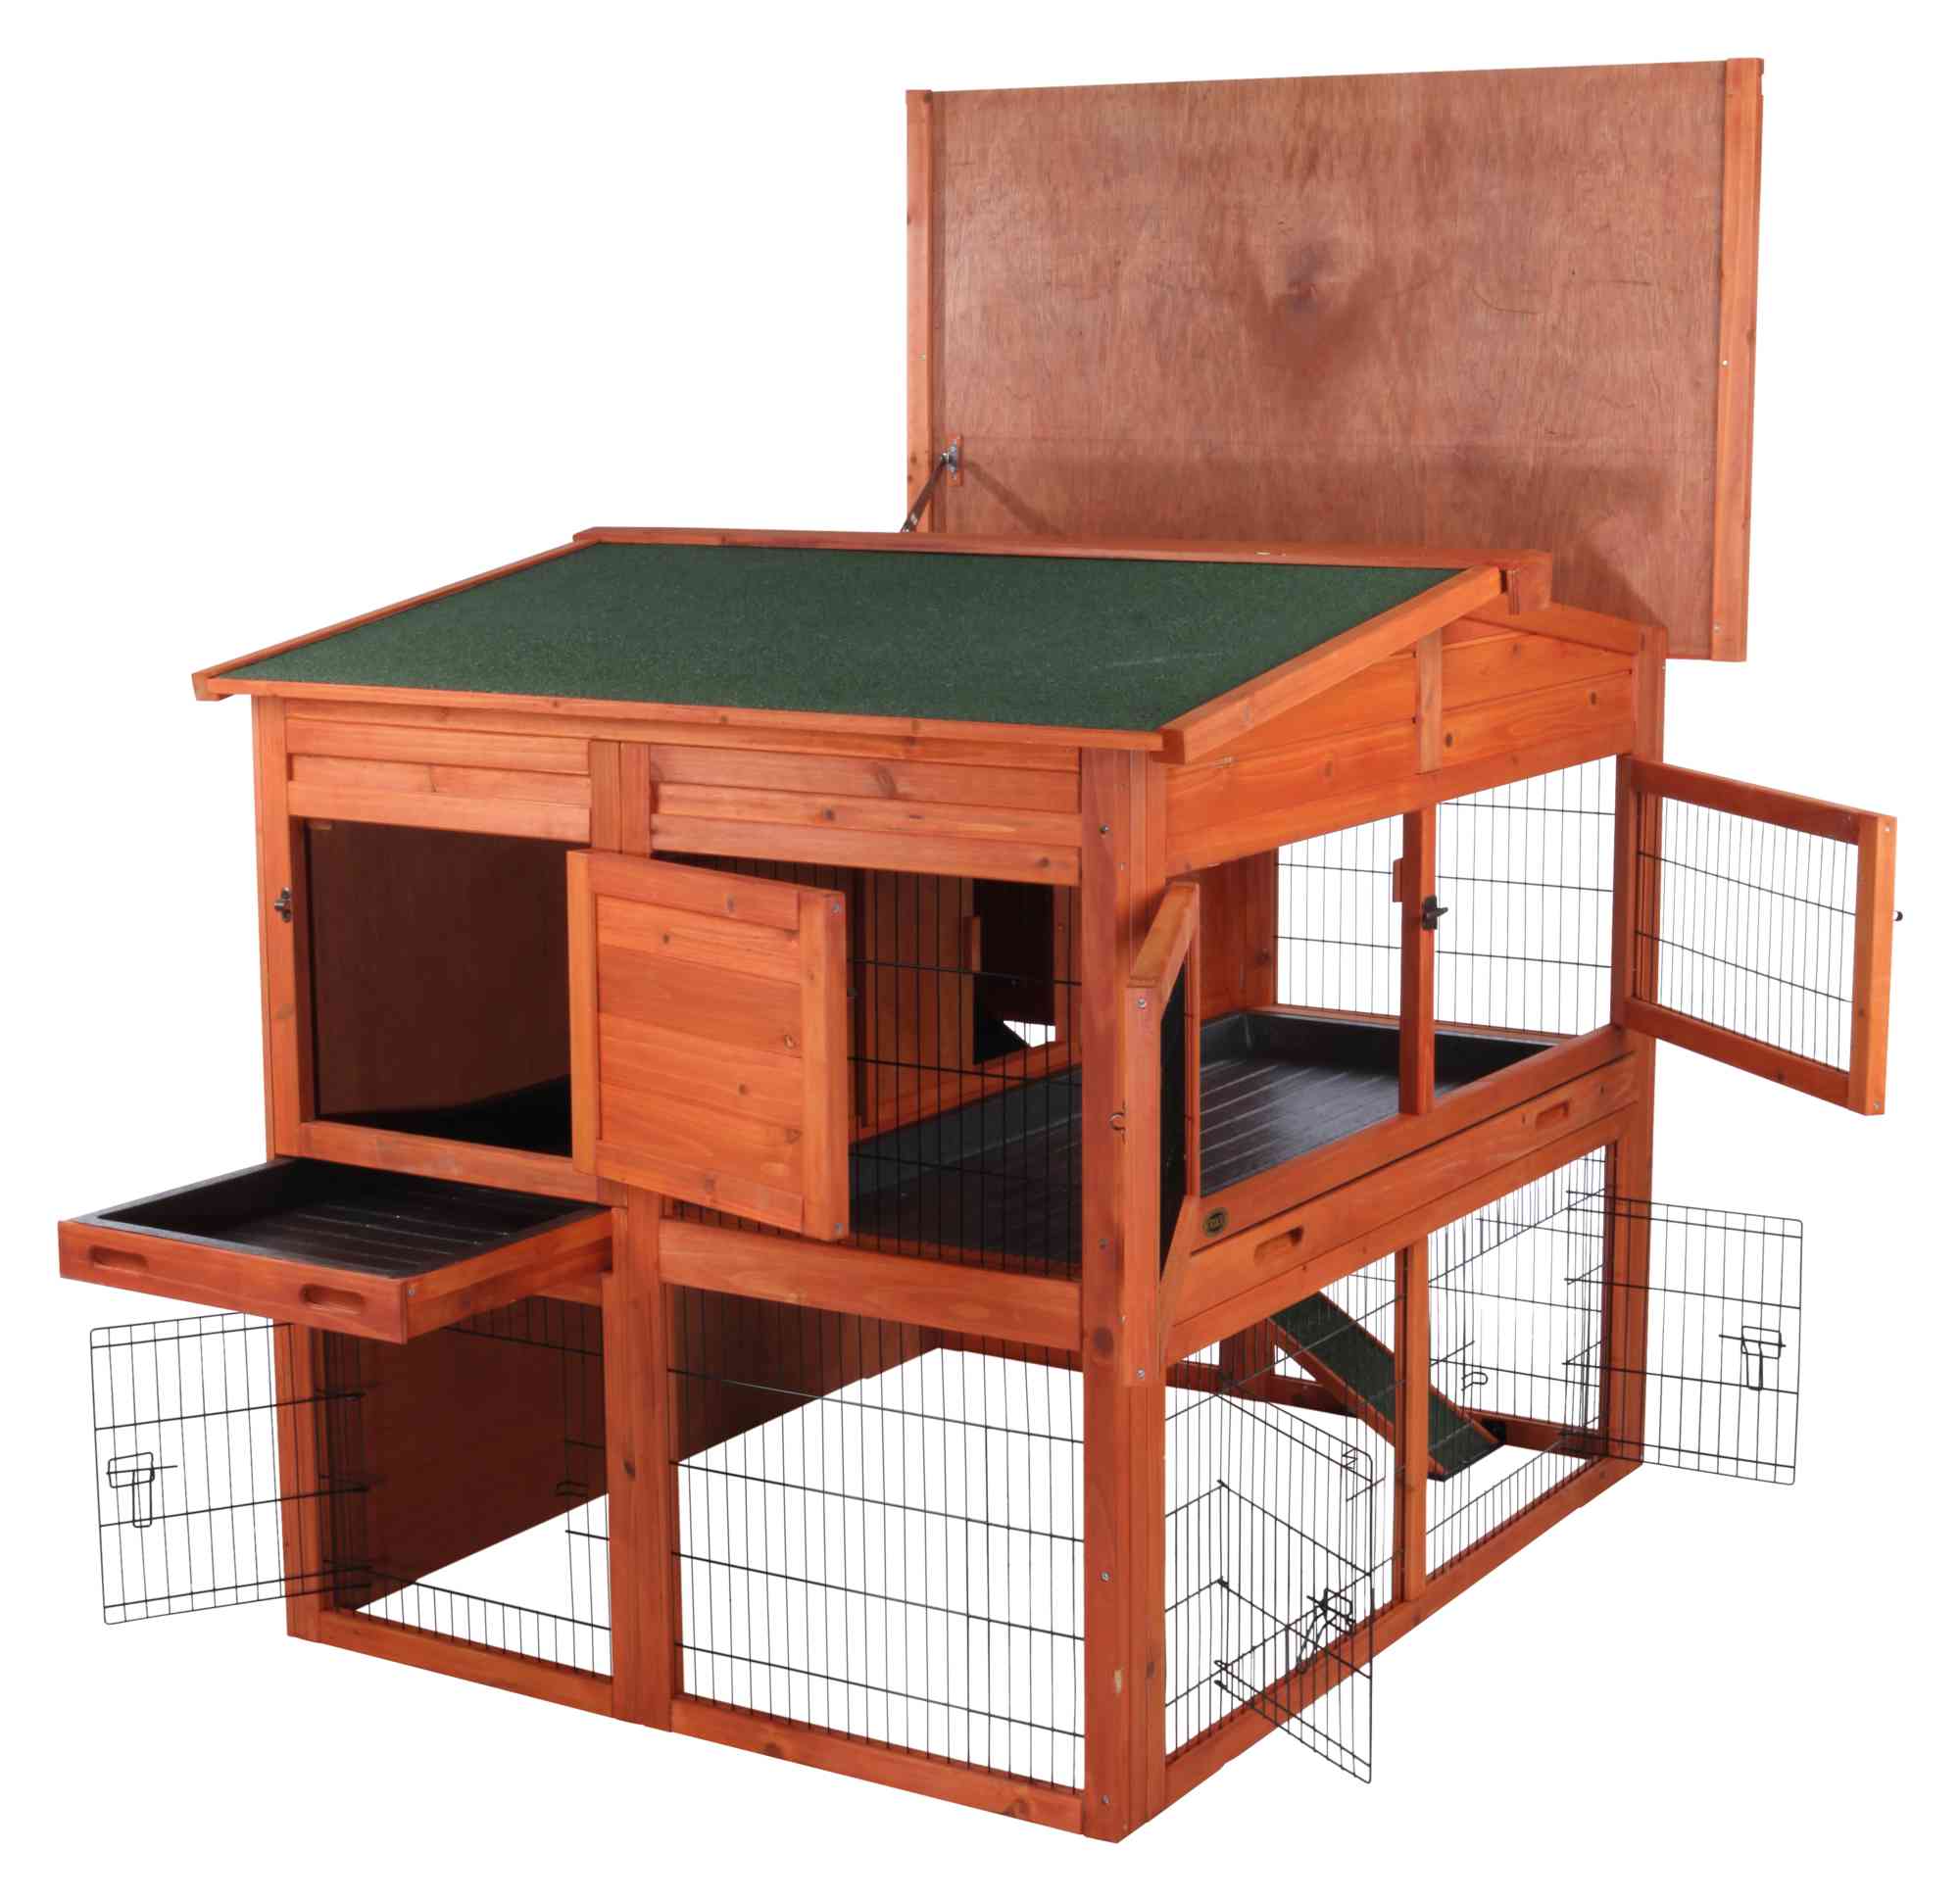 TRIXIE Deluxe Weatherproof Outdoor 2-Story Large Wooden Small Animal Hutch, Run, Tray, Brown - image 6 of 7